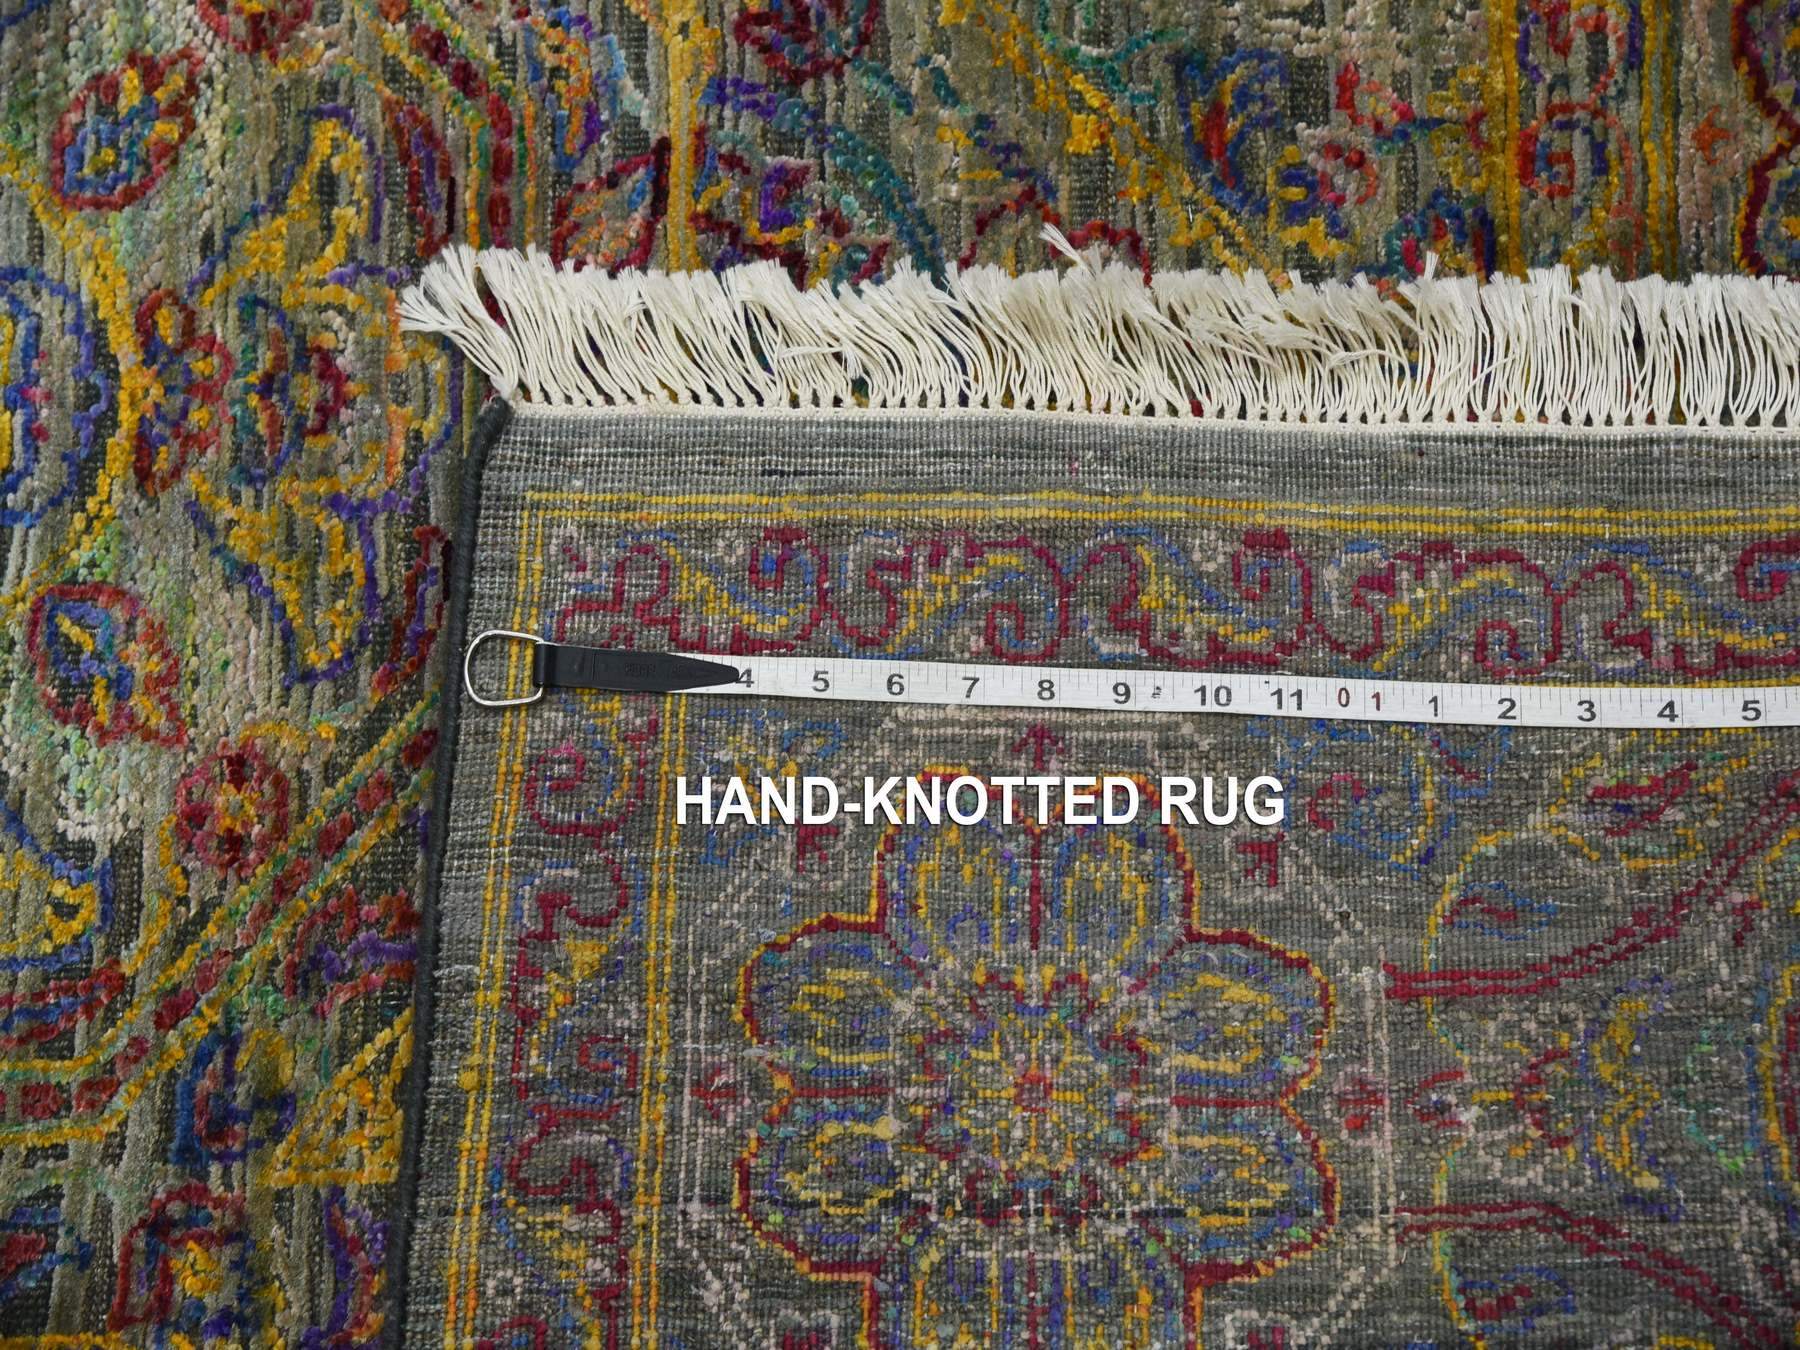 Traditional Rugs LUV677106